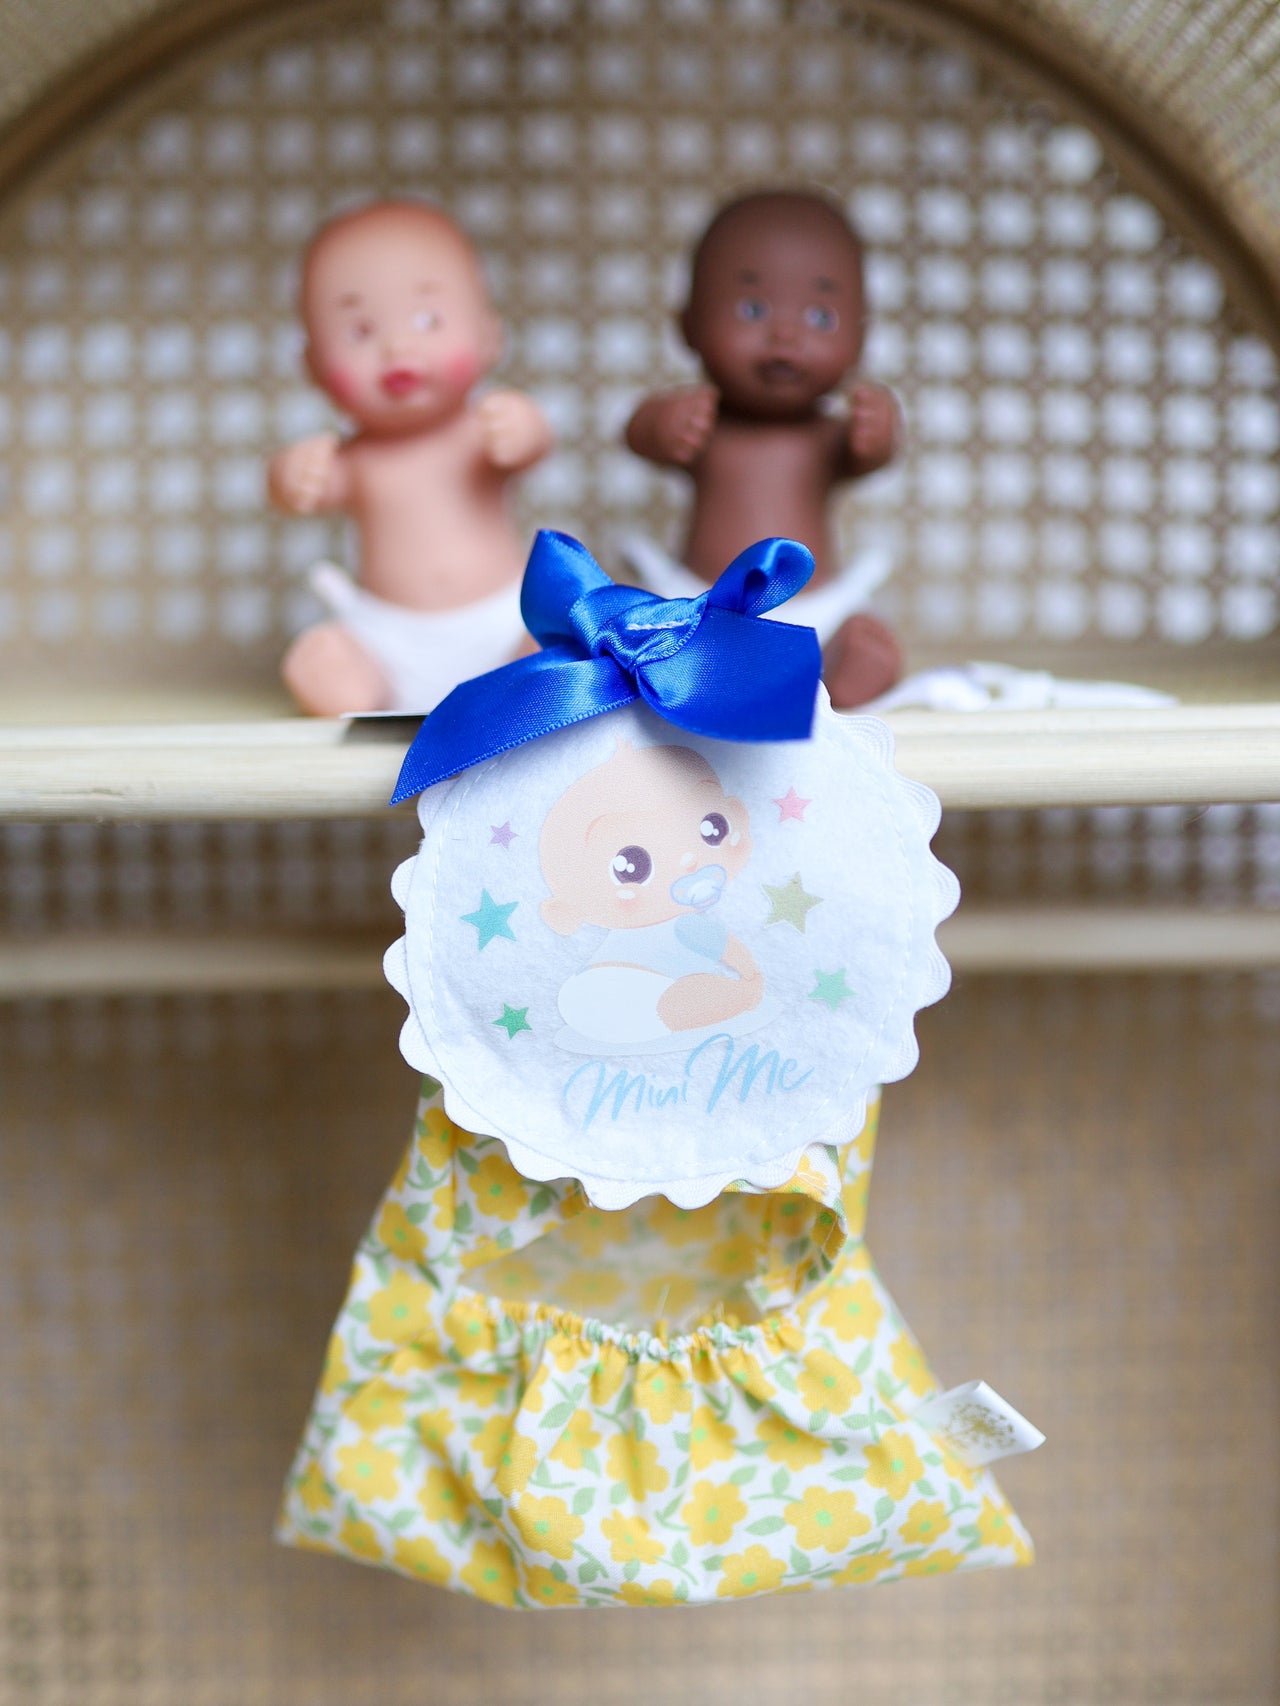 Mini Me Babies - 3.9" Dolls with Clip-on Fabric Pouch